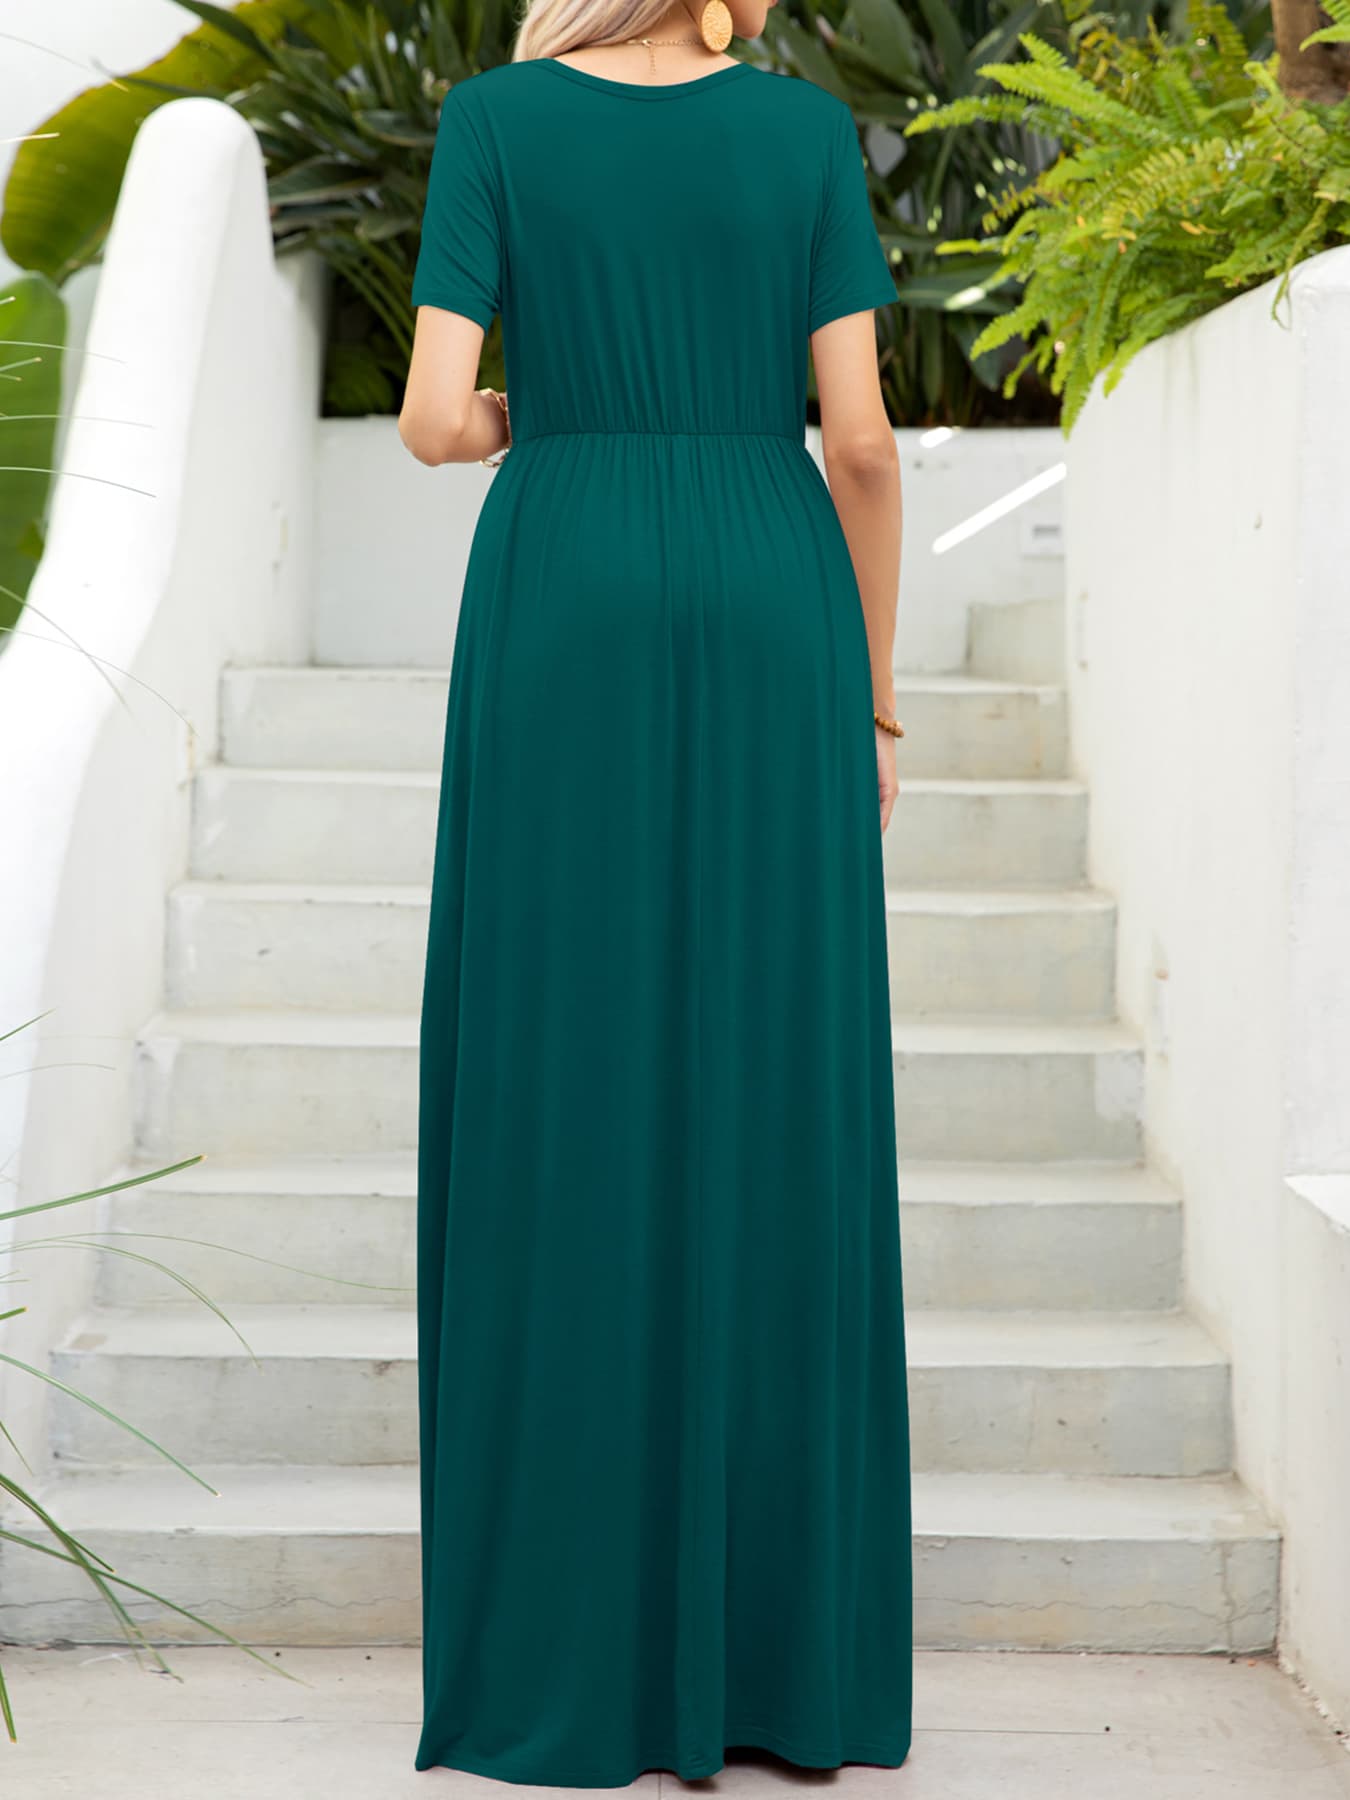 OCEANSIDE Round Neck Short Sleeve Maxi Dress with Pockets